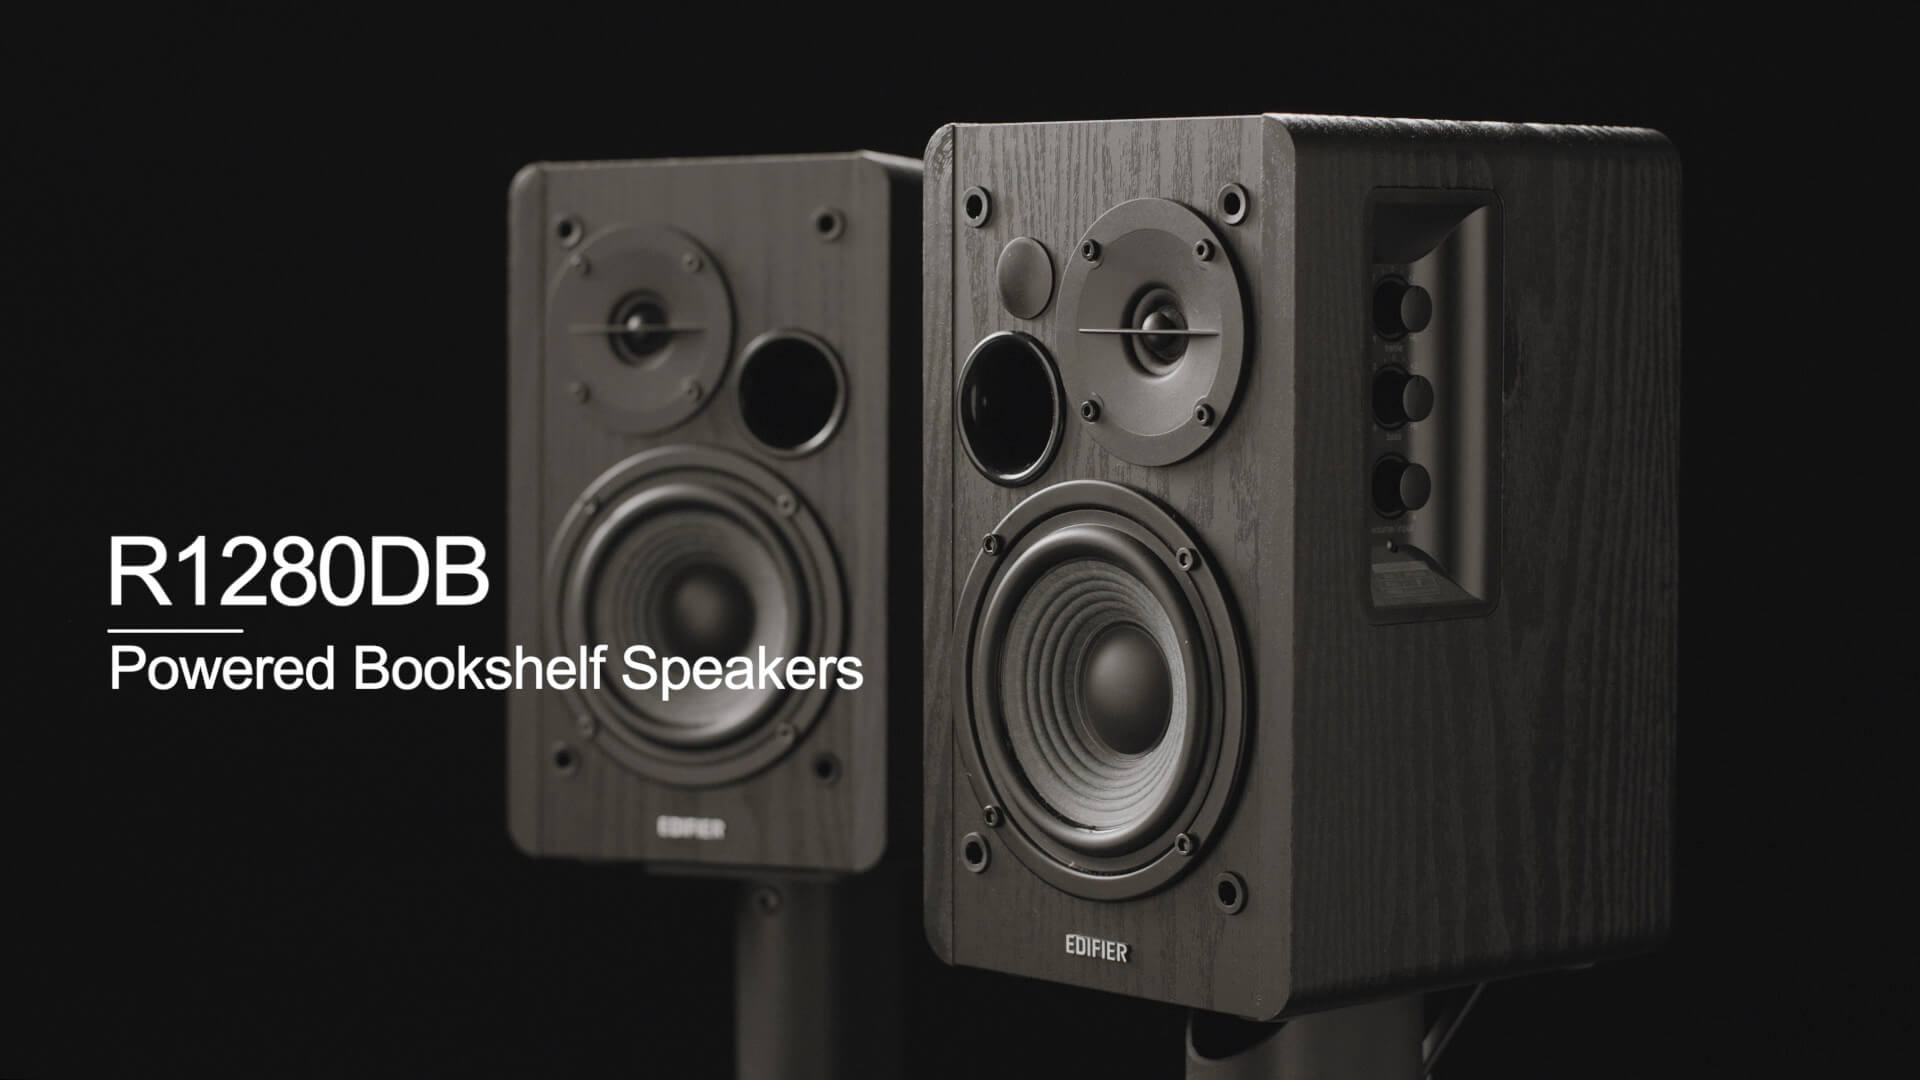 Edifier R1280DBs Active Bluetooth Bookshelf Speakers - Optical Input - 2.0  Wireless Studio Monitor Speaker - 42W RMS with Subwoofer Line Out - Wood